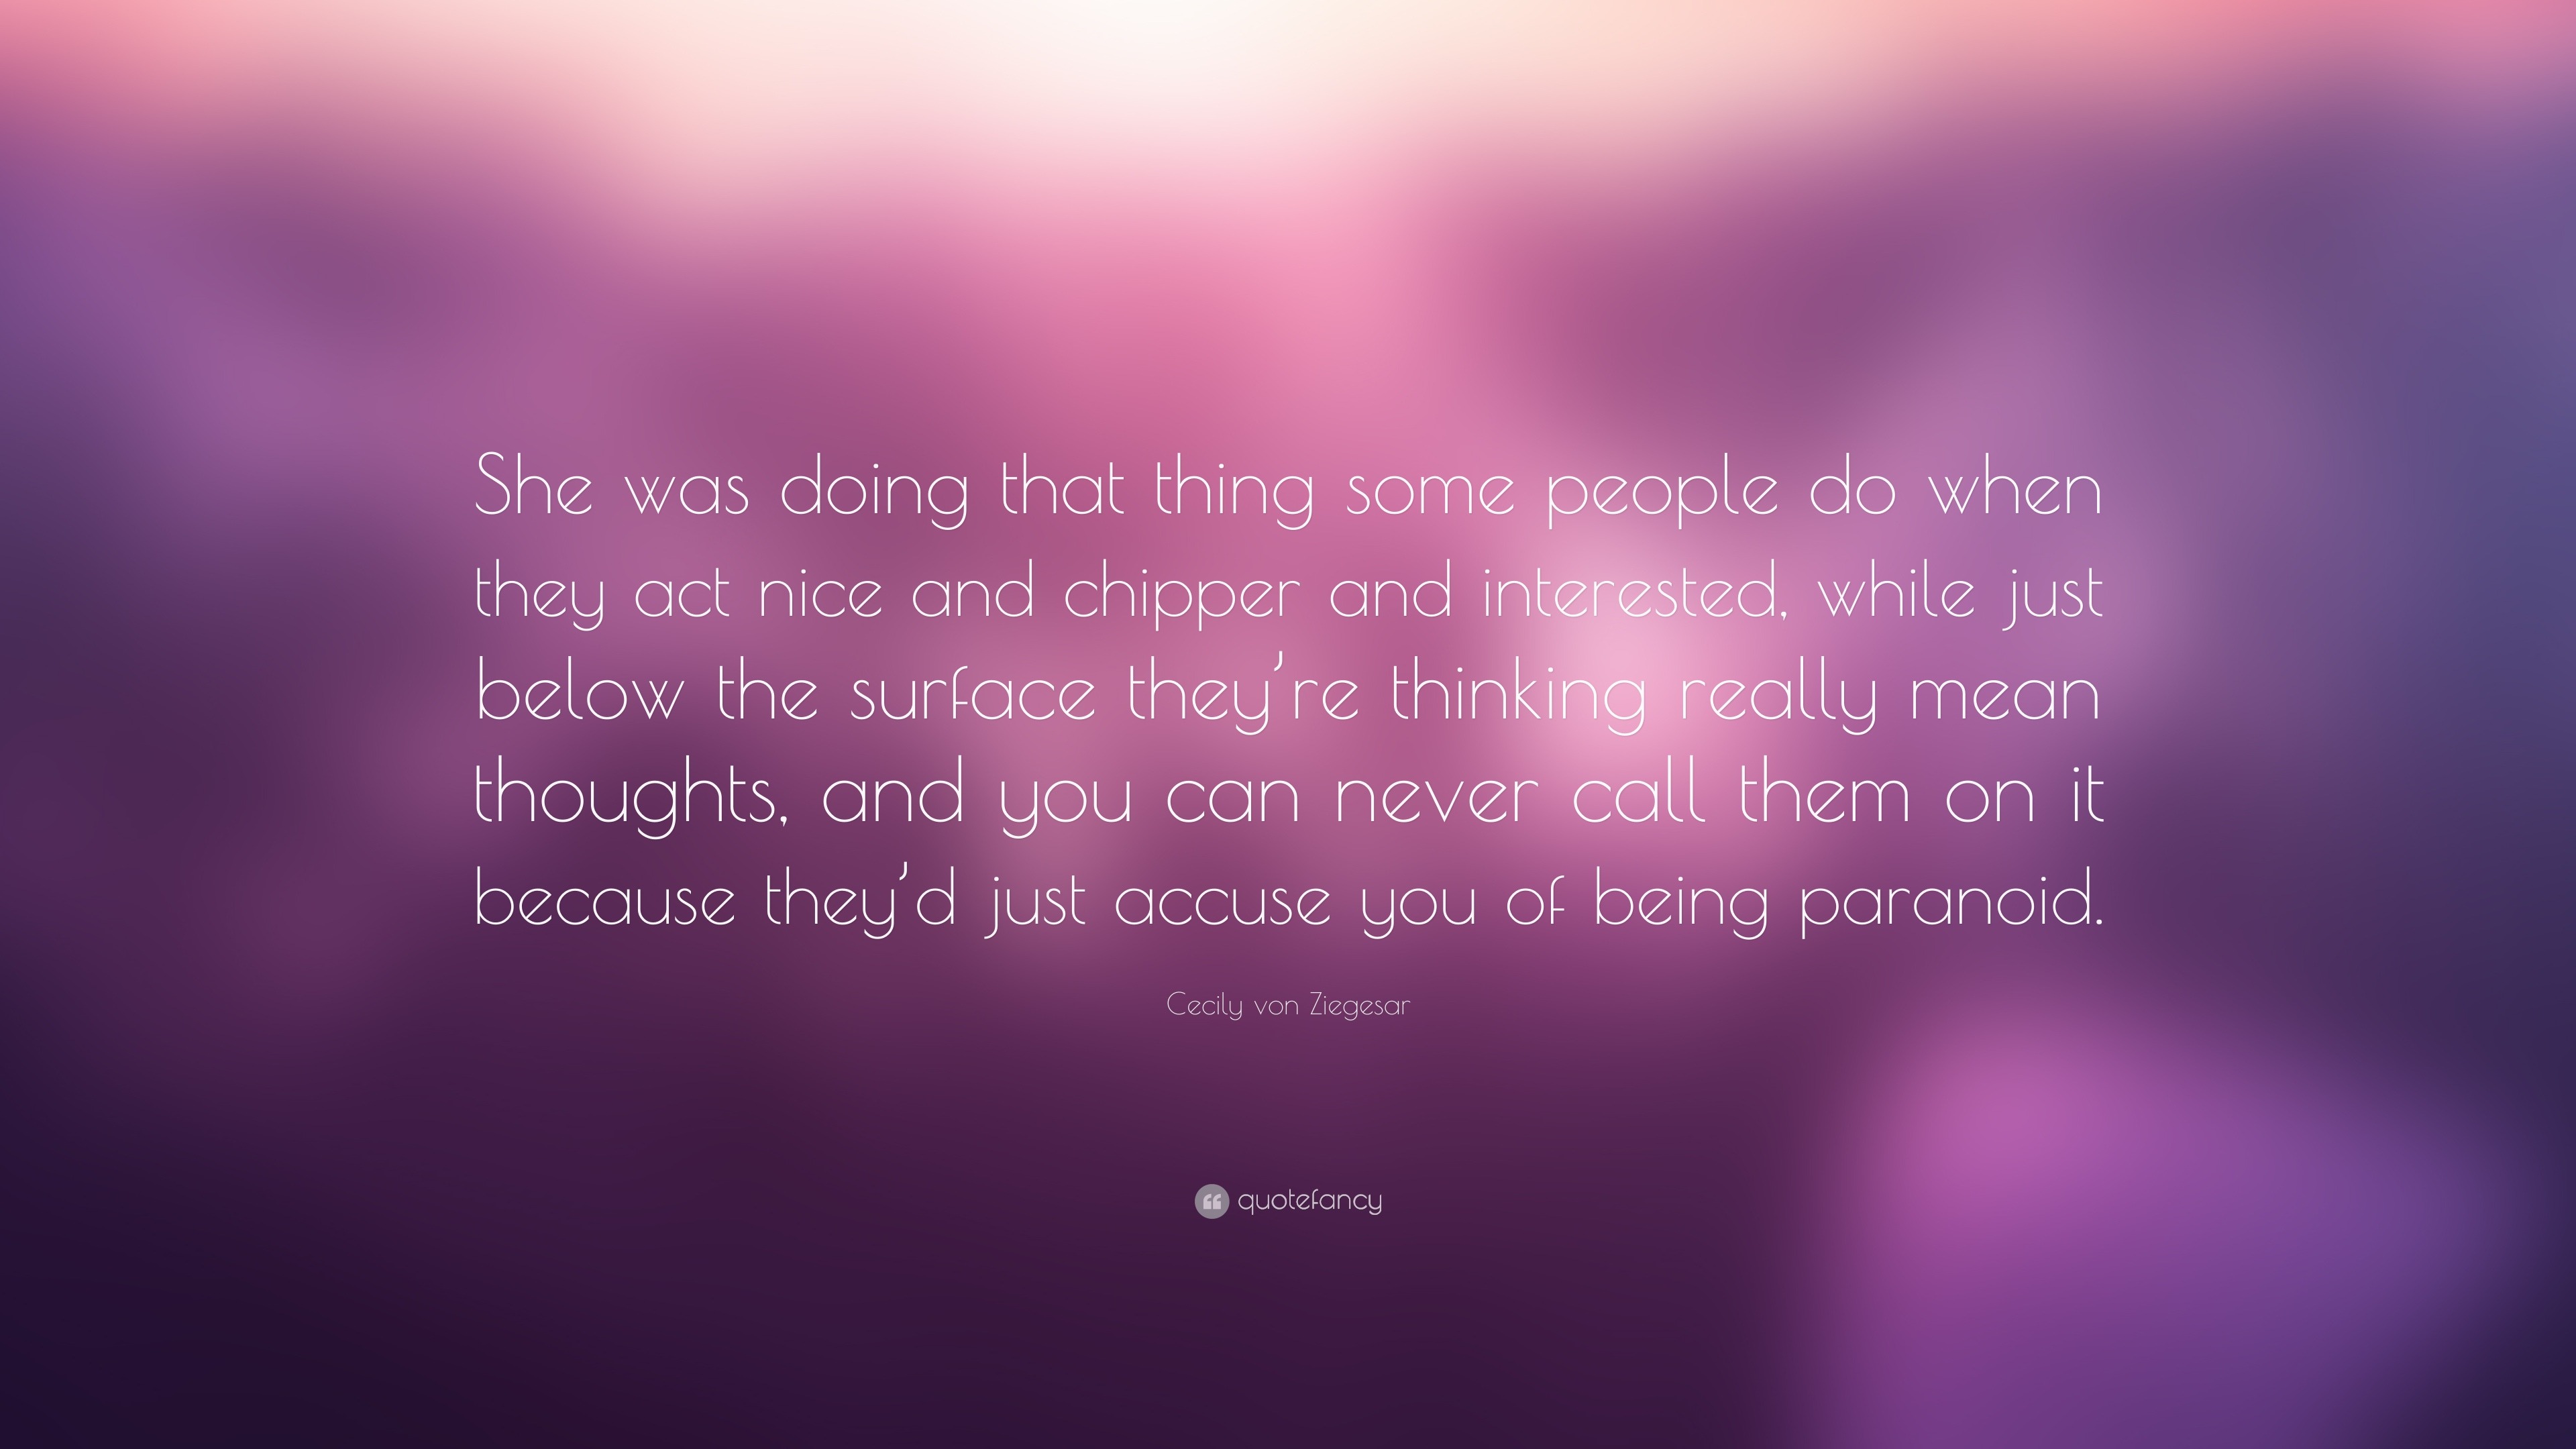 Cecily von Ziegesar Quote: “She was doing that thing some people do ...